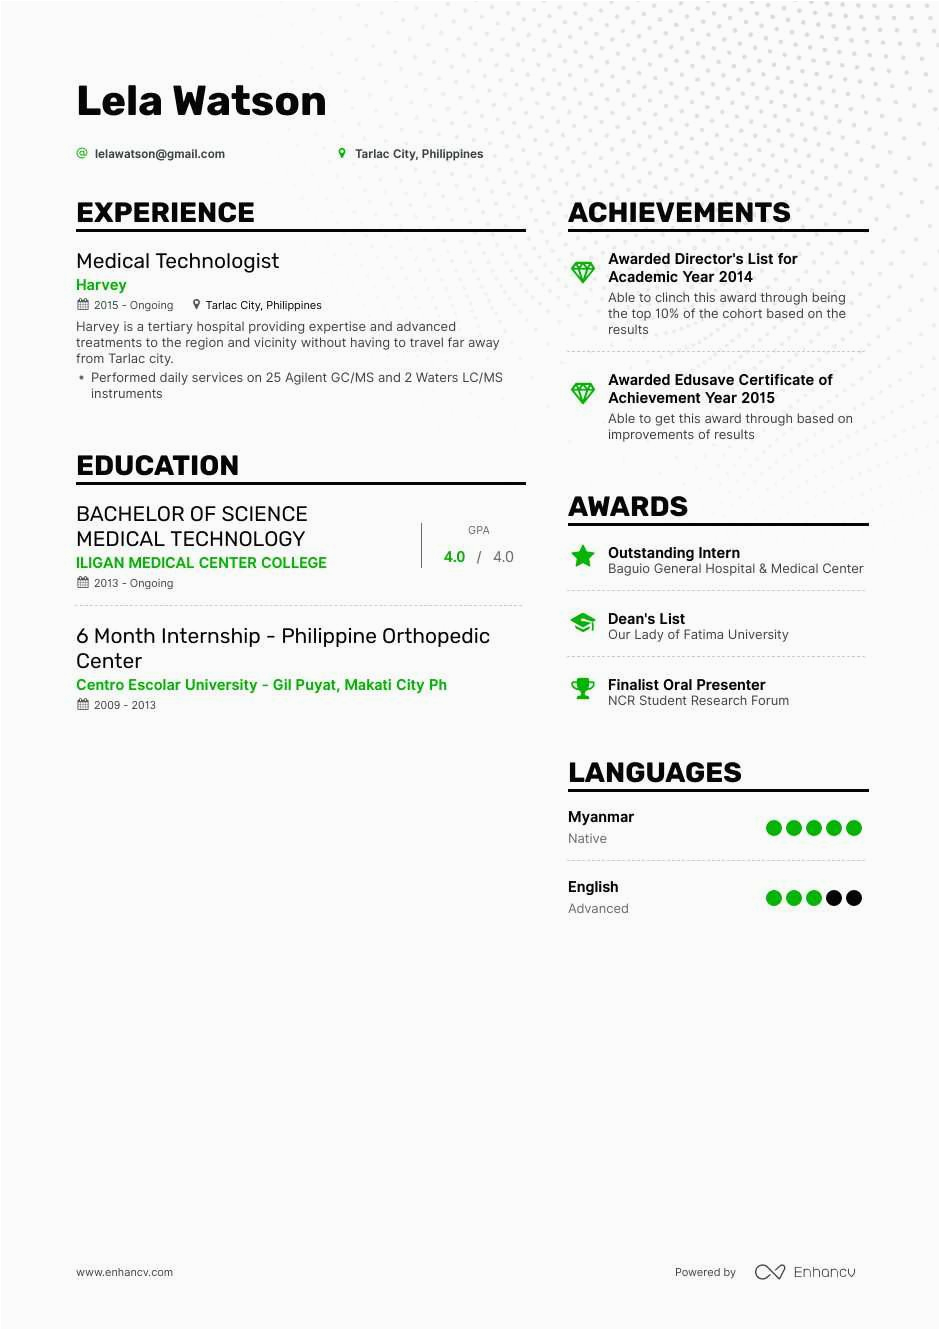 Sample Resume for Medical Technologist In the Philippines Updated Resume format 2020 Philippines